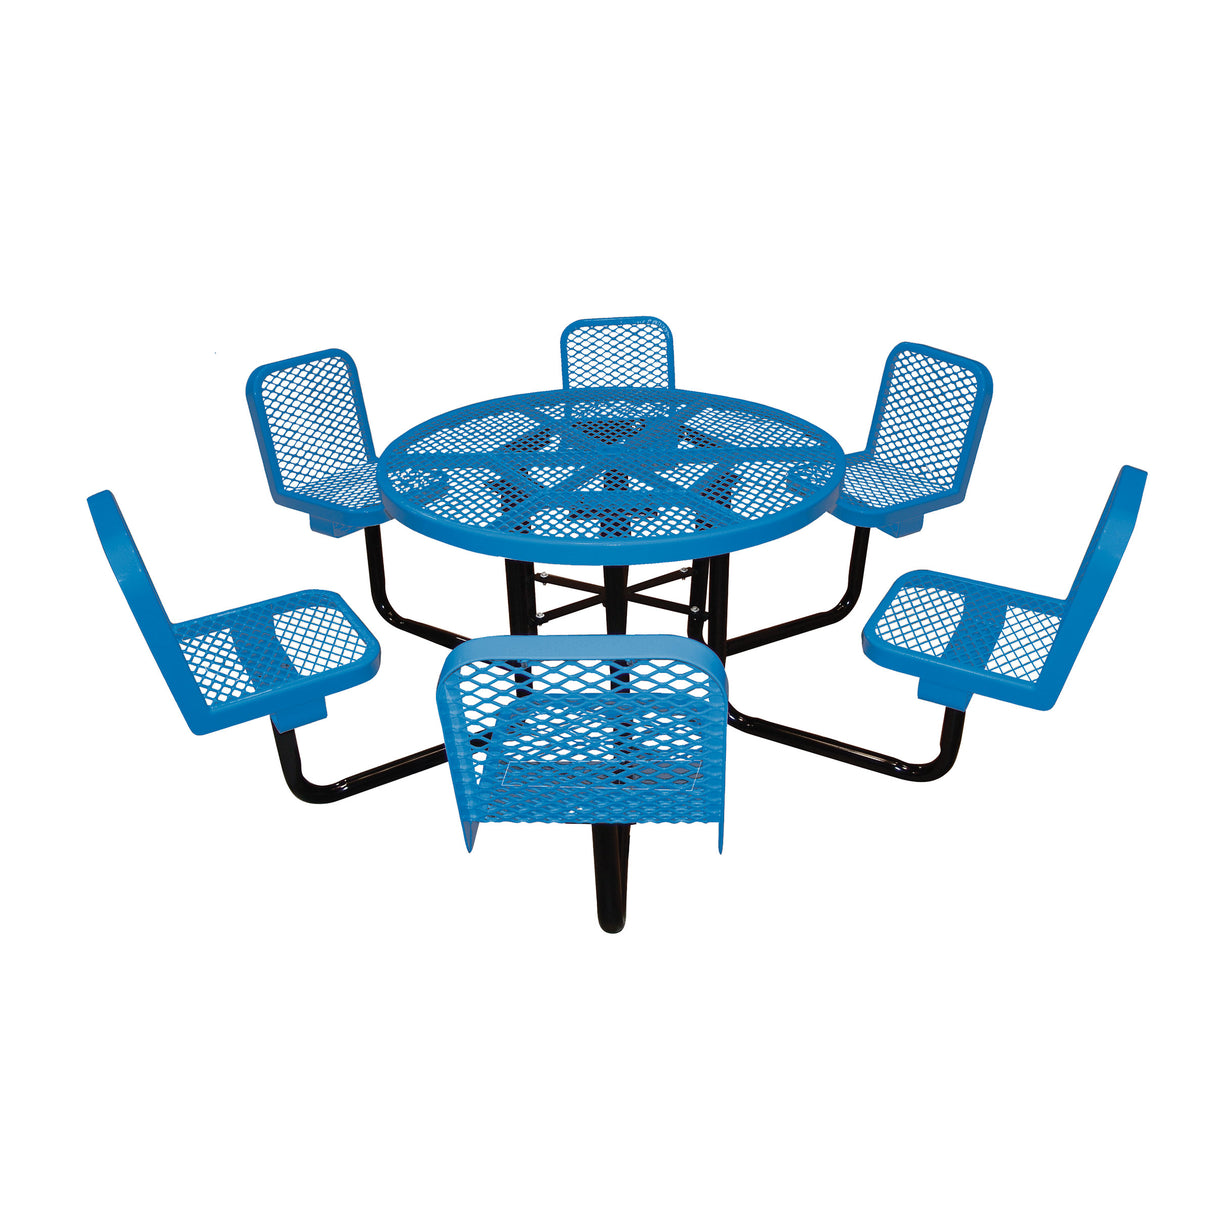 46˝ Round Table with Chairs